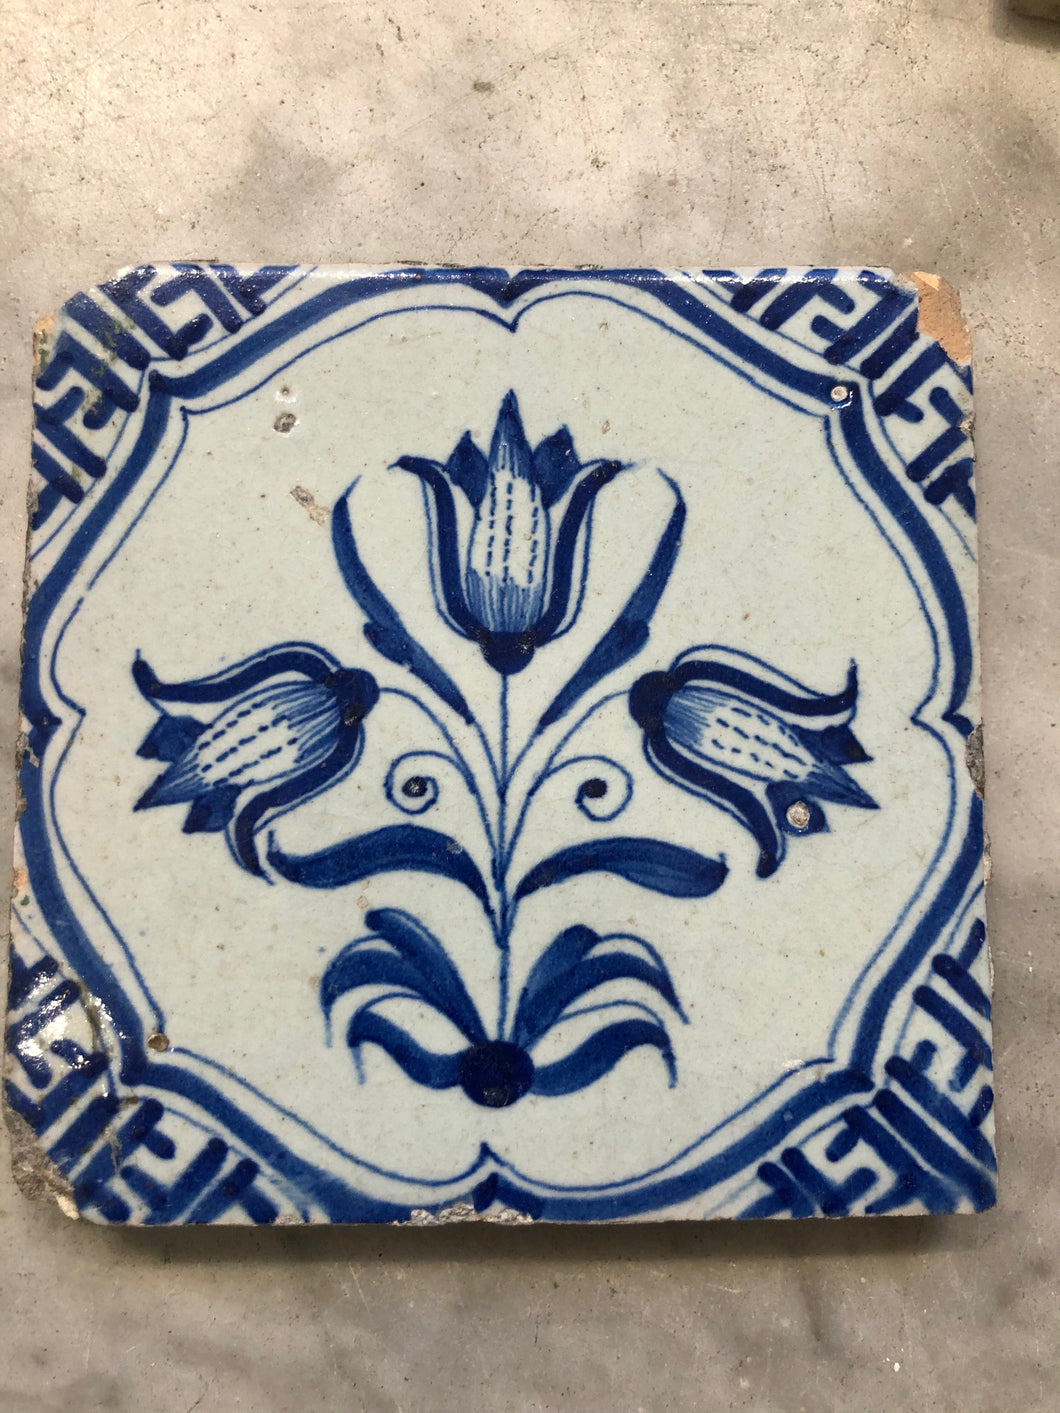 17th century delft dutch handpainted tile with 3 tulips